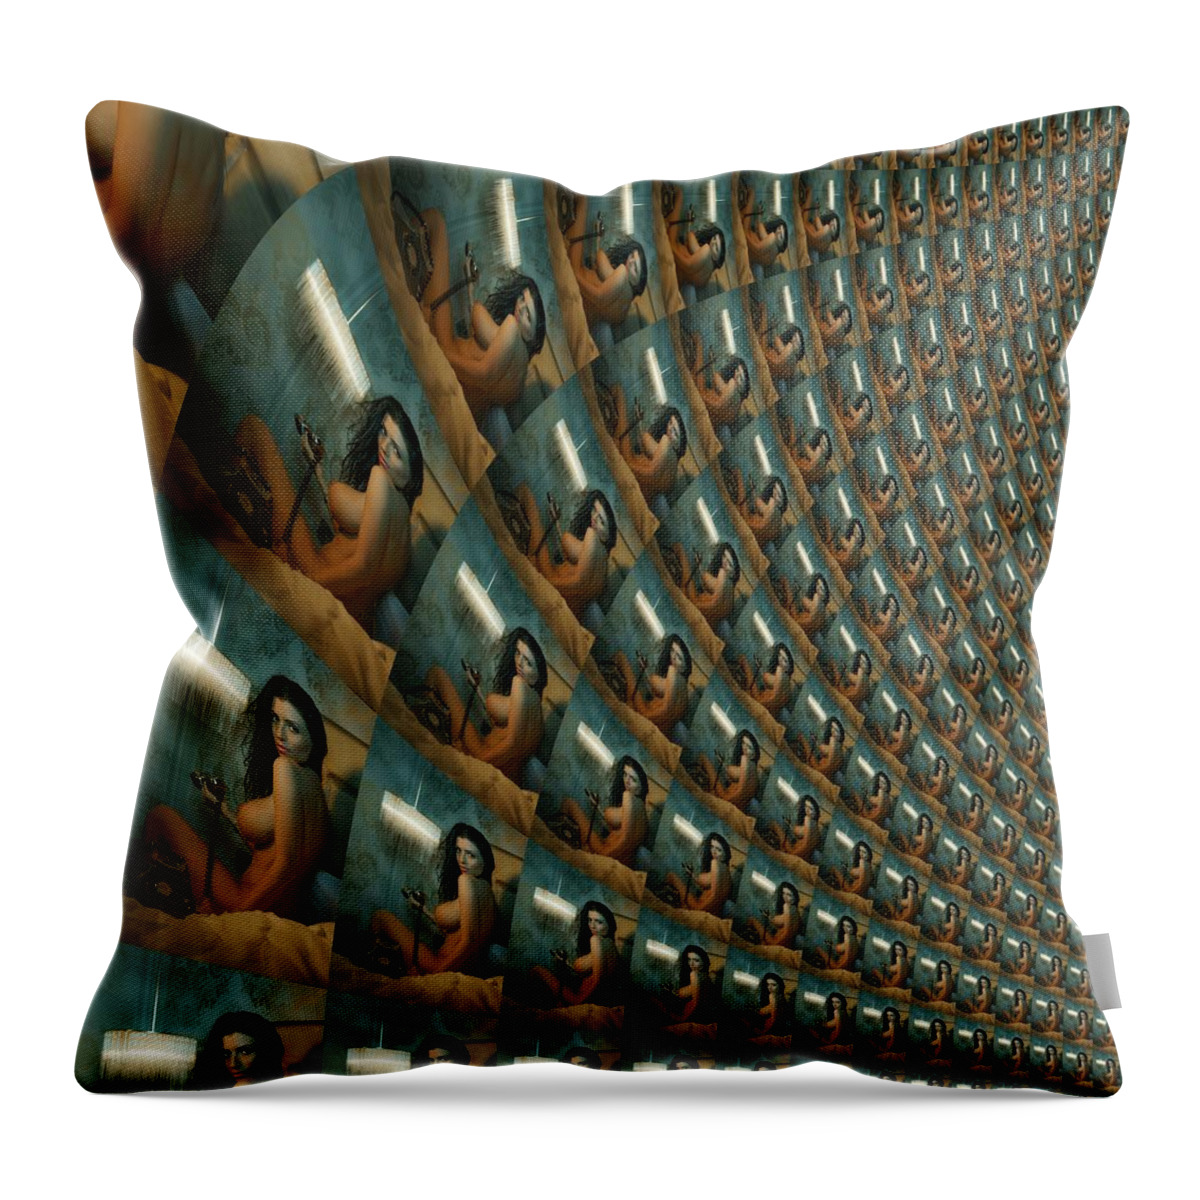 Trqoe Throw Pillow featuring the mixed media Ringing Polygon Invisible Army by Stephane Poirier